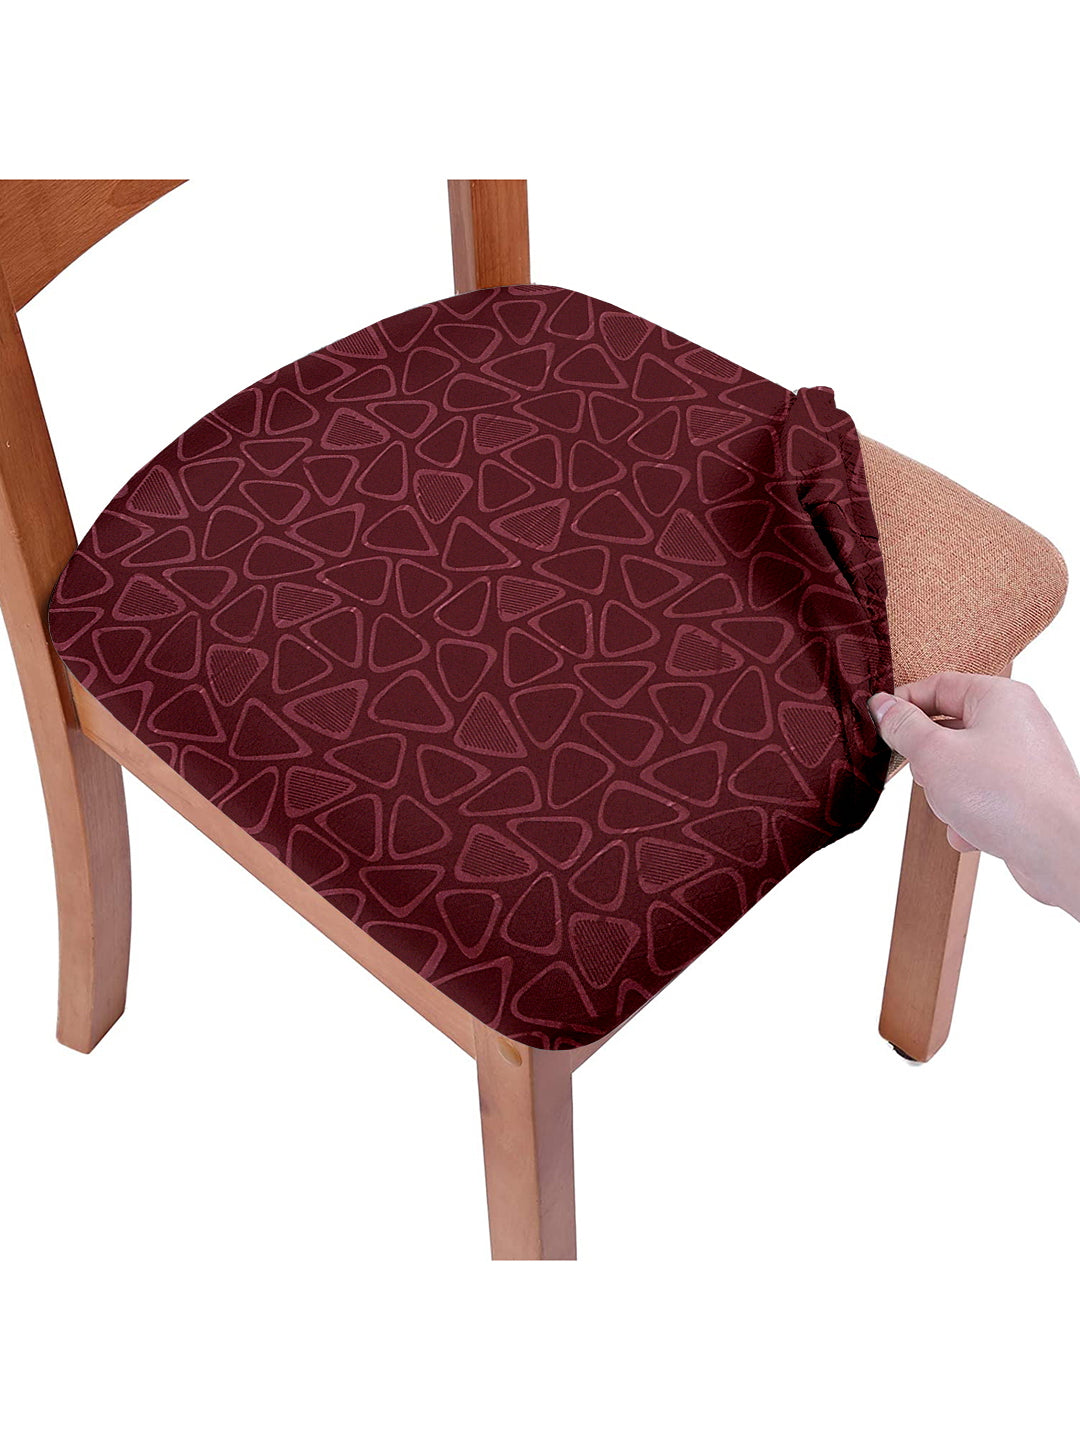 Stretchable Digital Printed Non Slip Chair Pad Cover Pack of 6- Maroon